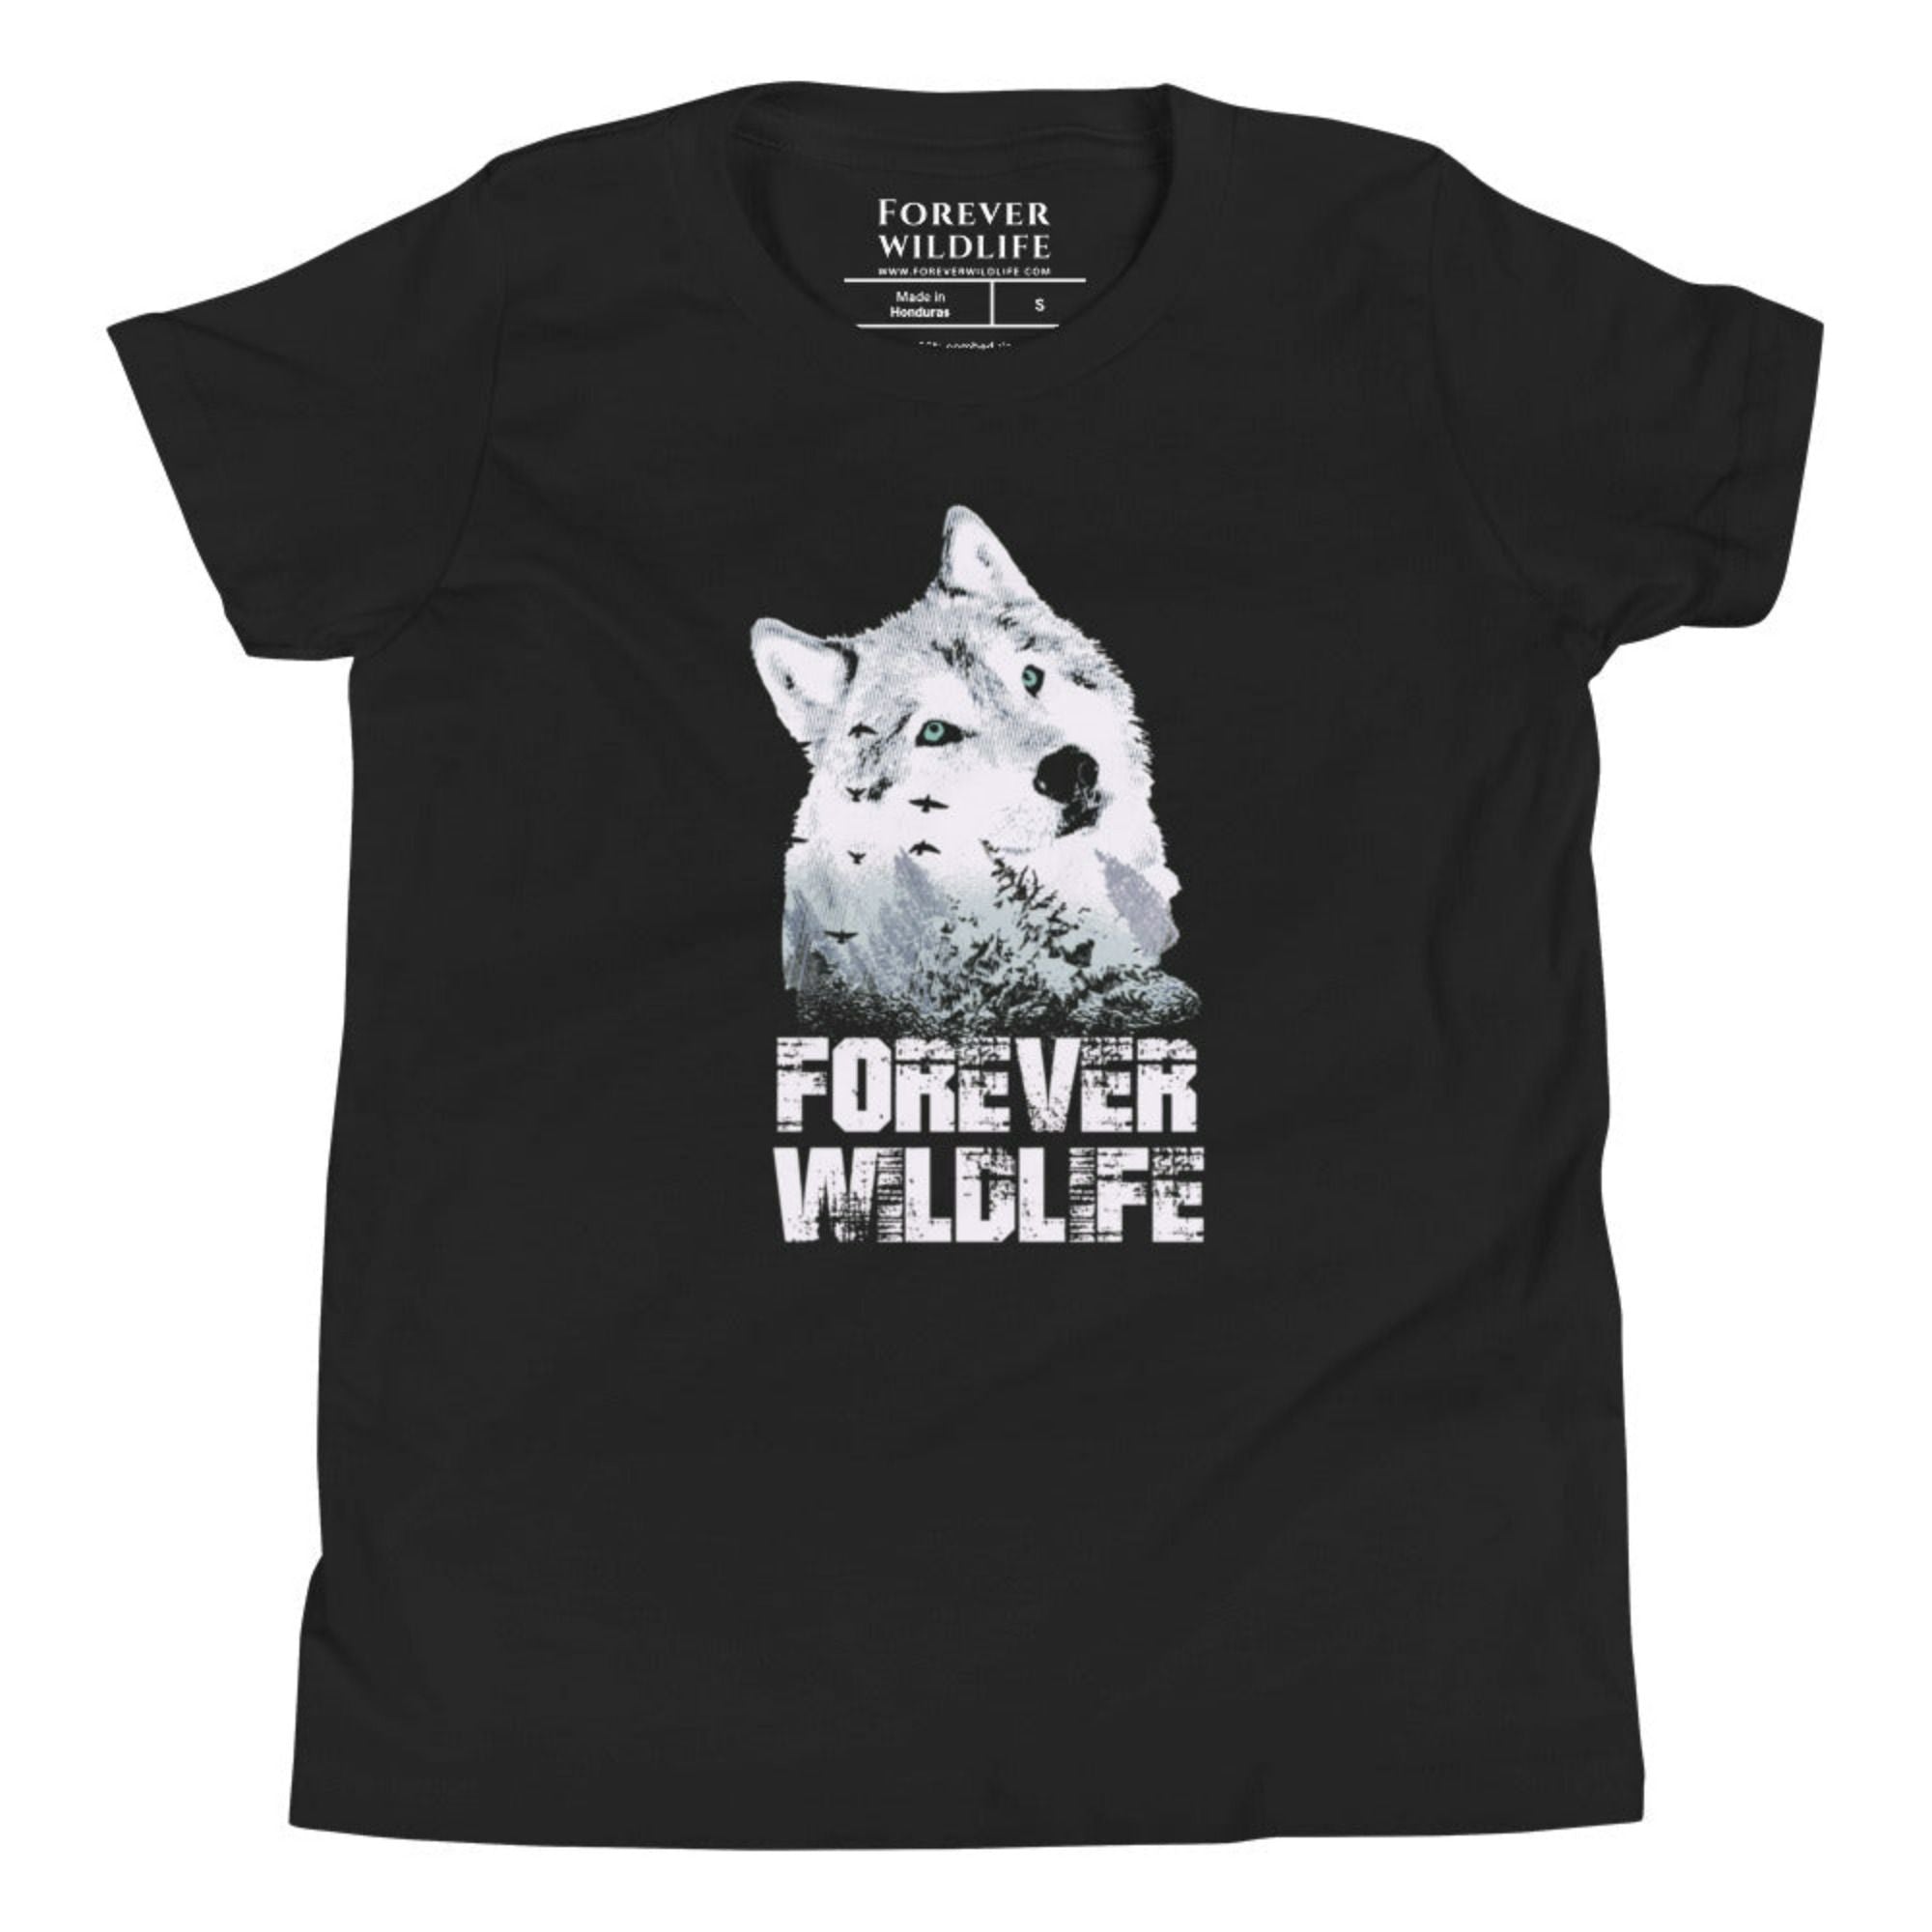 Black Youth T-Shirt with Wolf graphic as part of Wildlife T Shirts, Wildlife Clothing & Apparel by Forever Wildlife